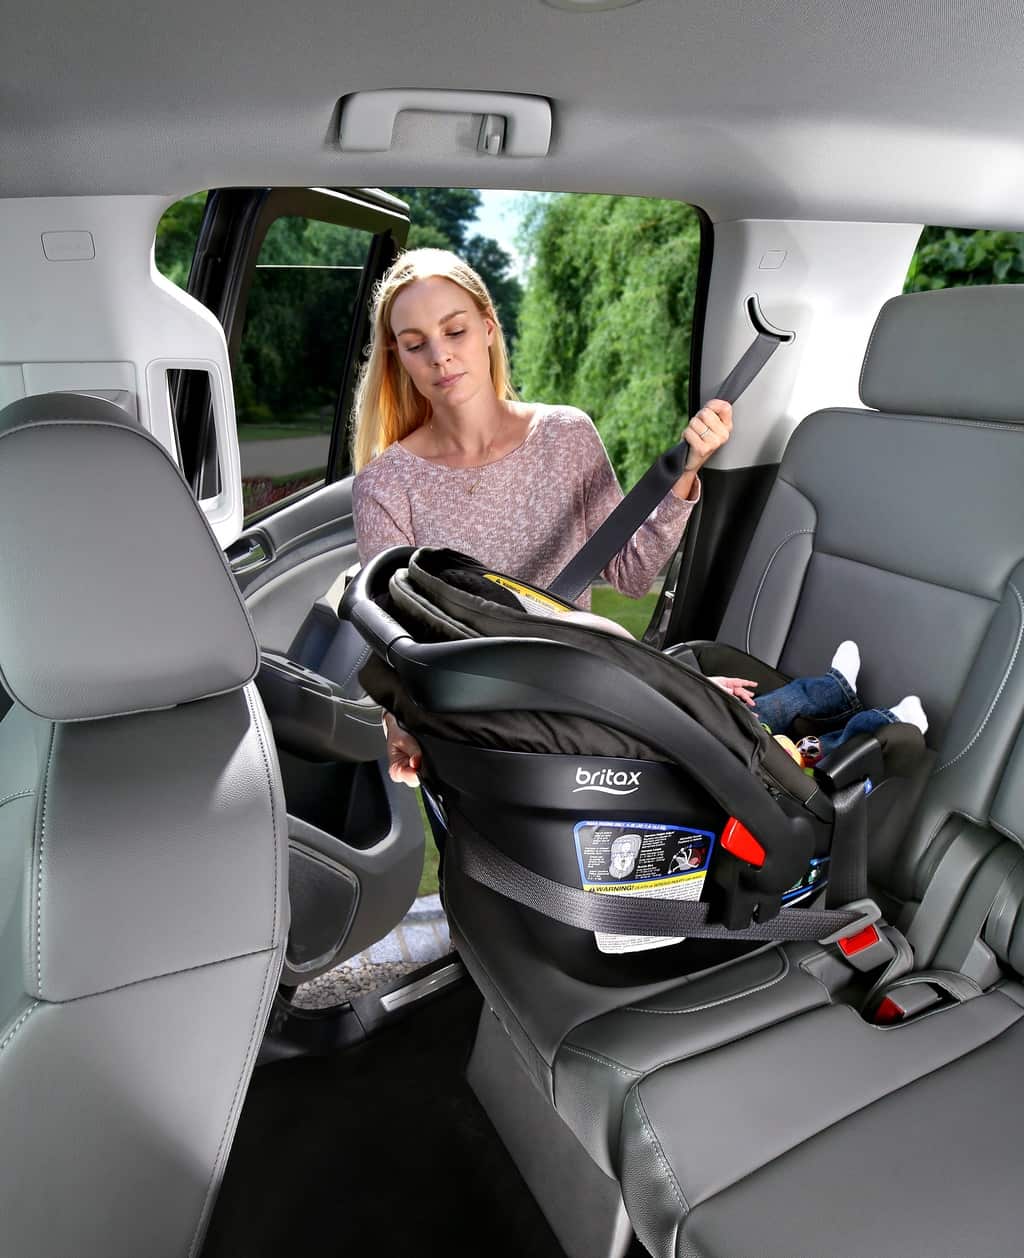 Learn more about car seat safety at the Test Drive Parenthood events on Sept. 20 at Newport Lexus in Newport Beach and Sept. 21 at South Bay Lexus in Los Angeles.